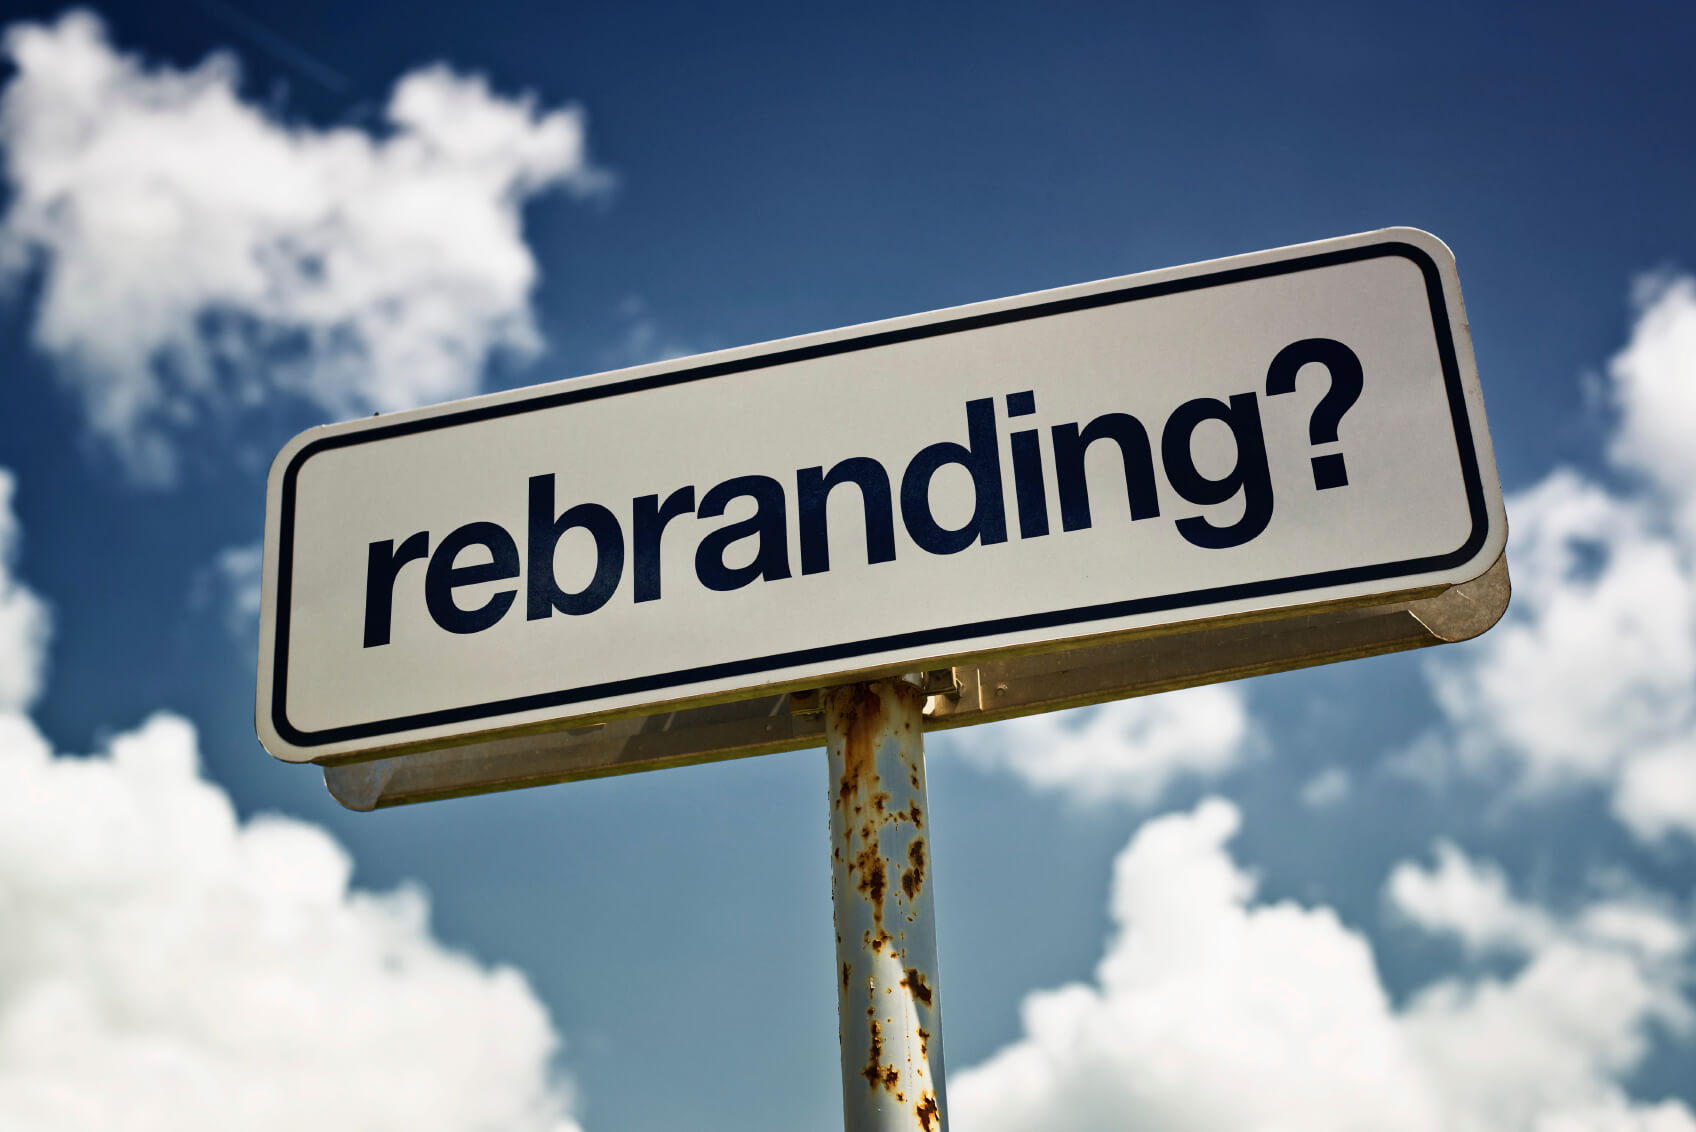 When is the Right Time to Rebrand? 7 Key Points to Consider